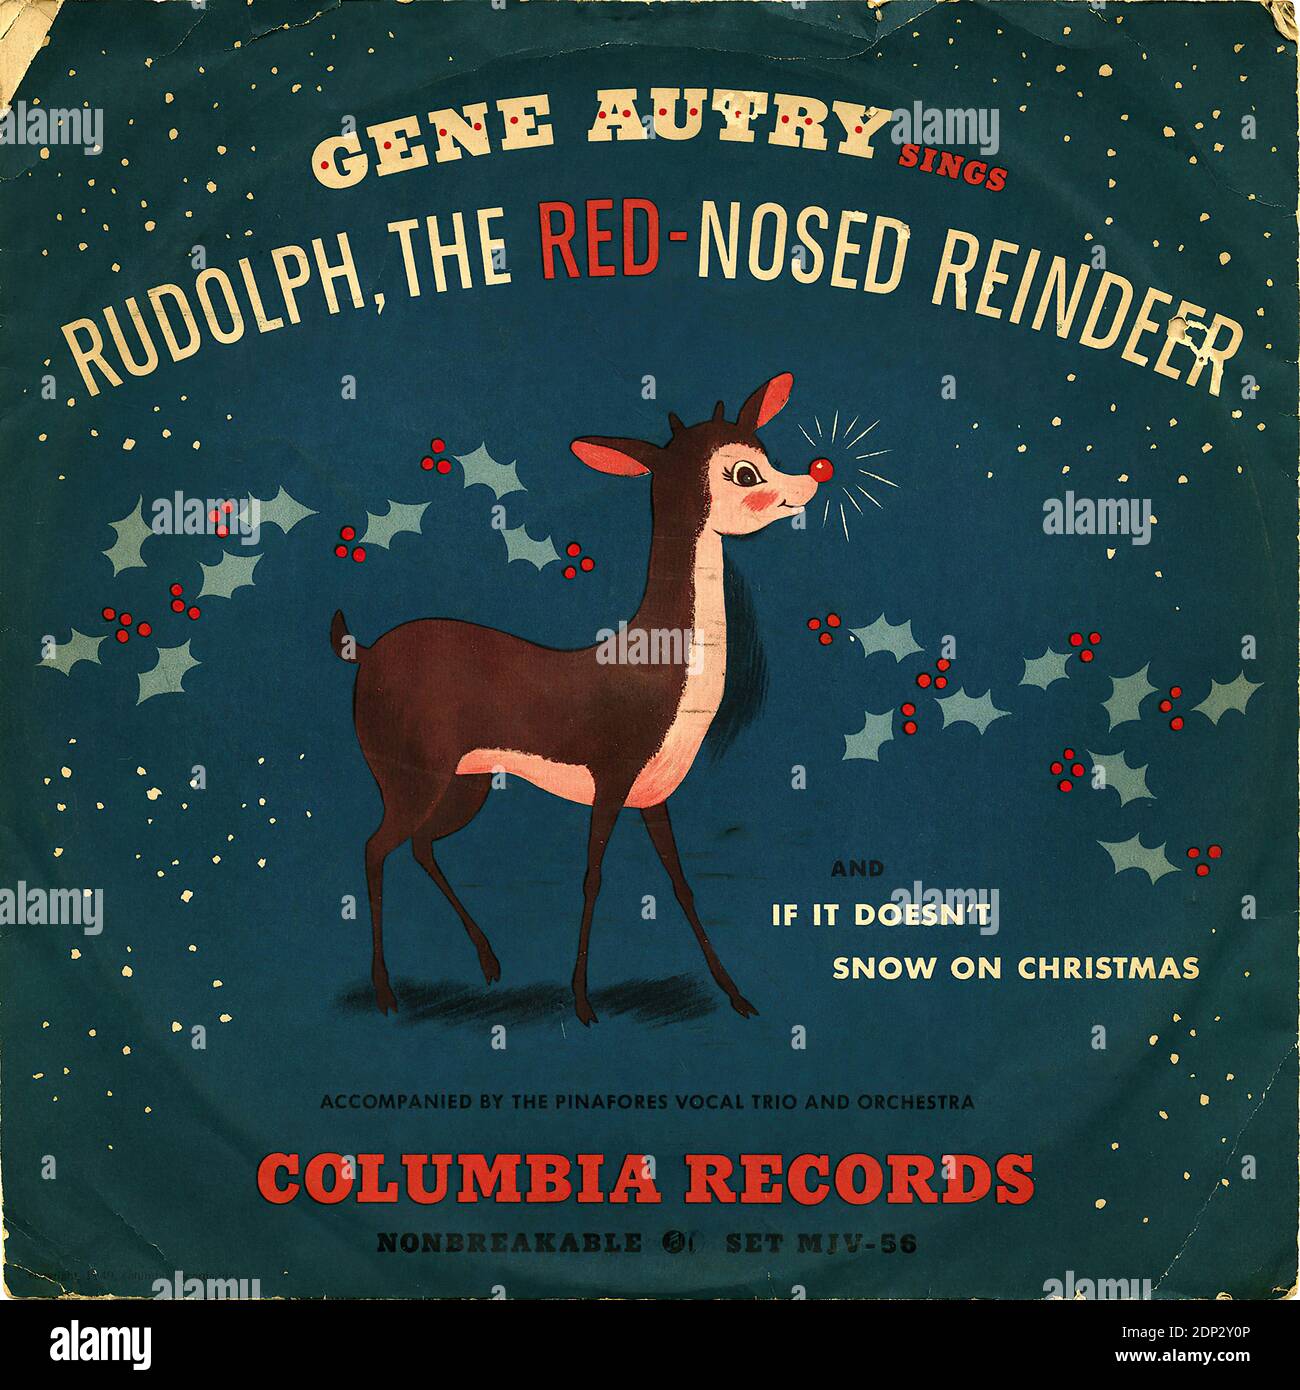 Rudolph, the Red Nosed Reindeer - Vintage Record Cover Stock Photo